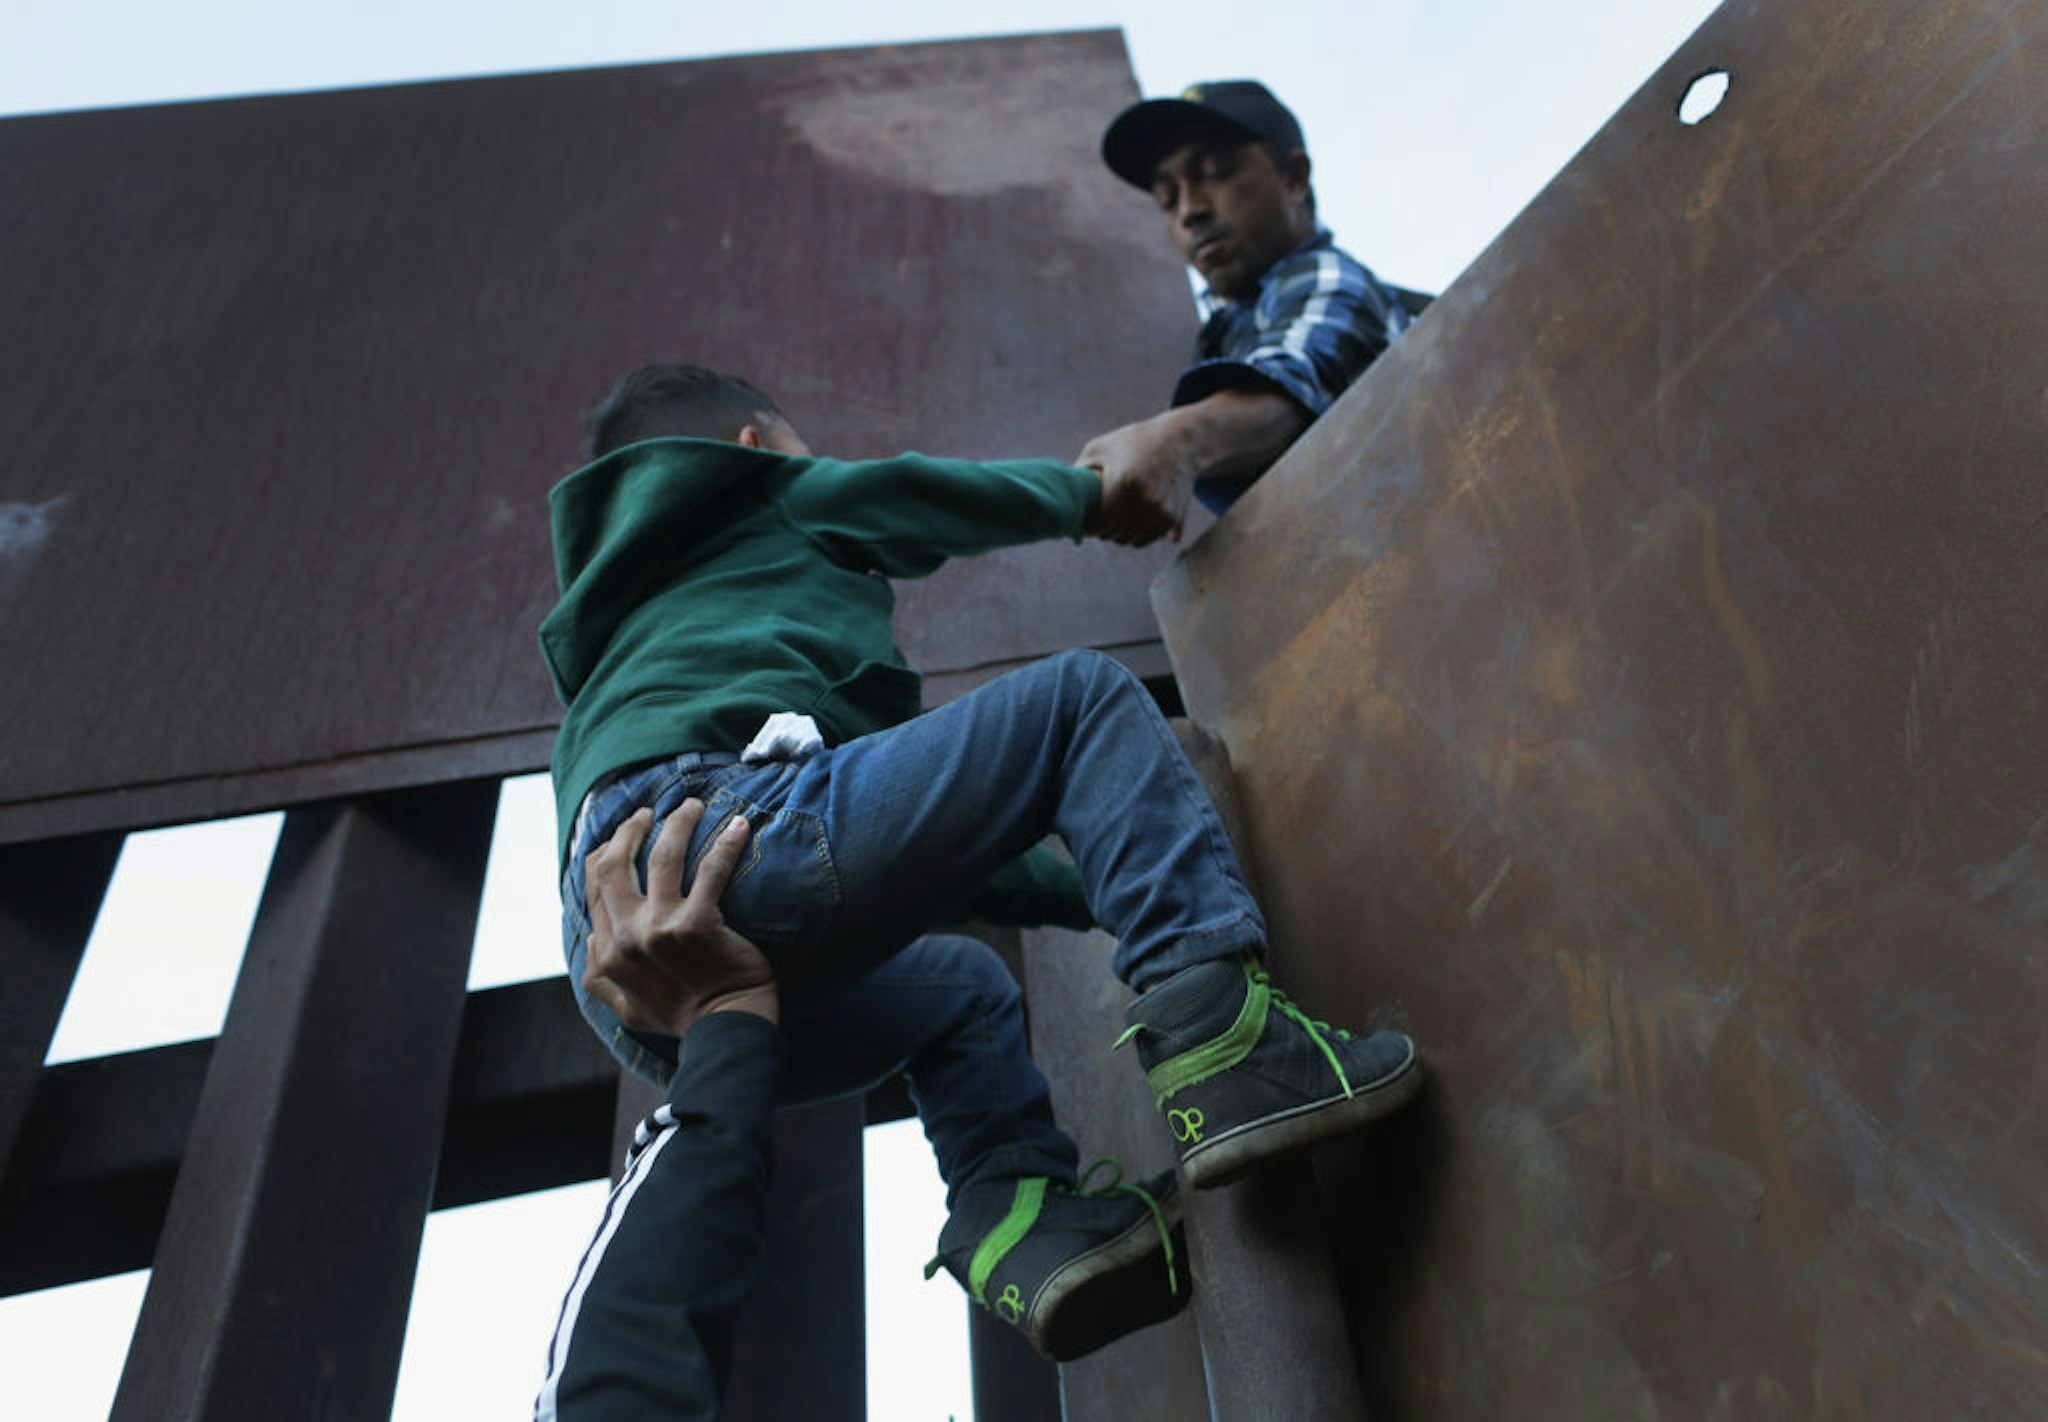 TIJUANA, MEXICO - DECEMBER 02: A boy is hoisted by fellow members of the migrant caravan over the U.S.-Mexico border fence on December 2, 2018 from Tijuana, Mexico. Numerous members of the caravan were able to cross over from Tijuana to San Diego and were quickly taken into custody by U.S. Border Patrol agents. Most had planned to request political asylum in the United States after traveling more than 6 weeks from Central America. (Photo by John Moore/Getty Images)